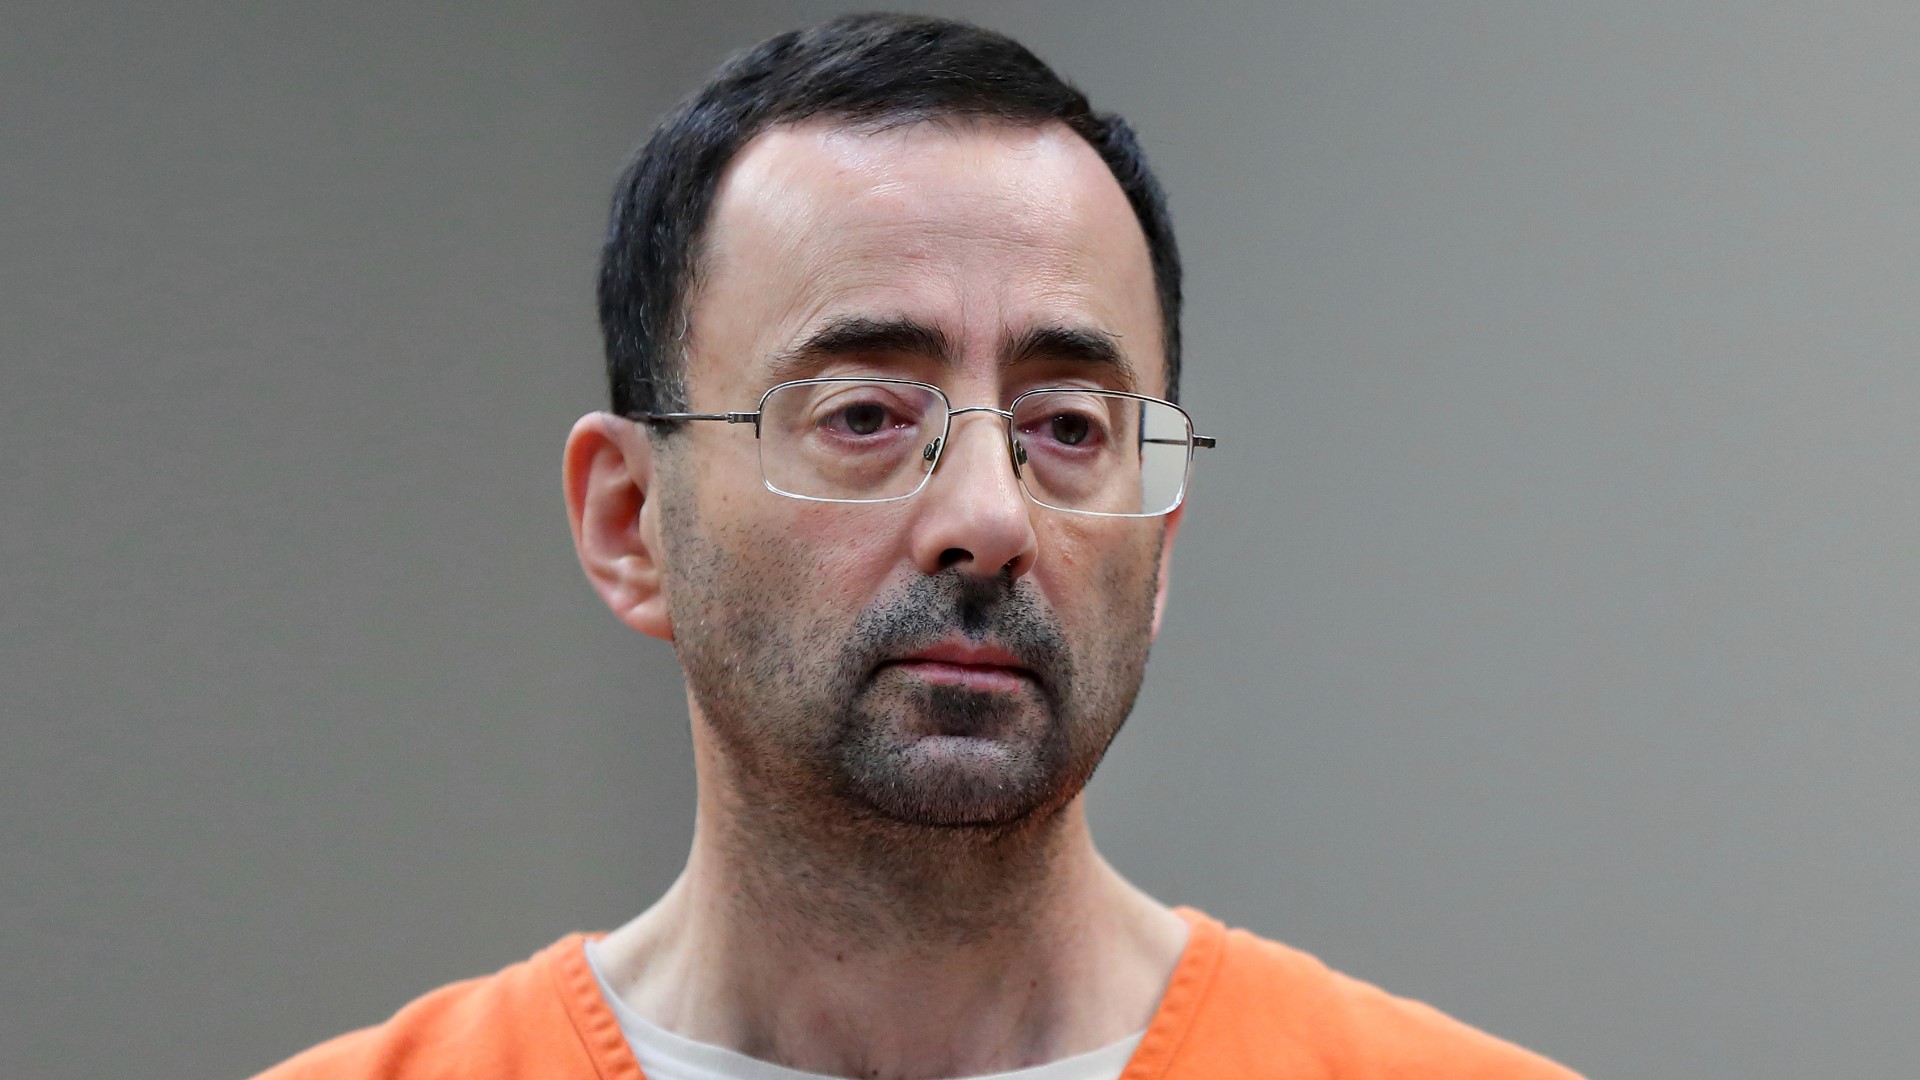 An internal investigation found that FBI agents mishandled abuse allegations by women more than a year before Nassar was arrested in 2016.